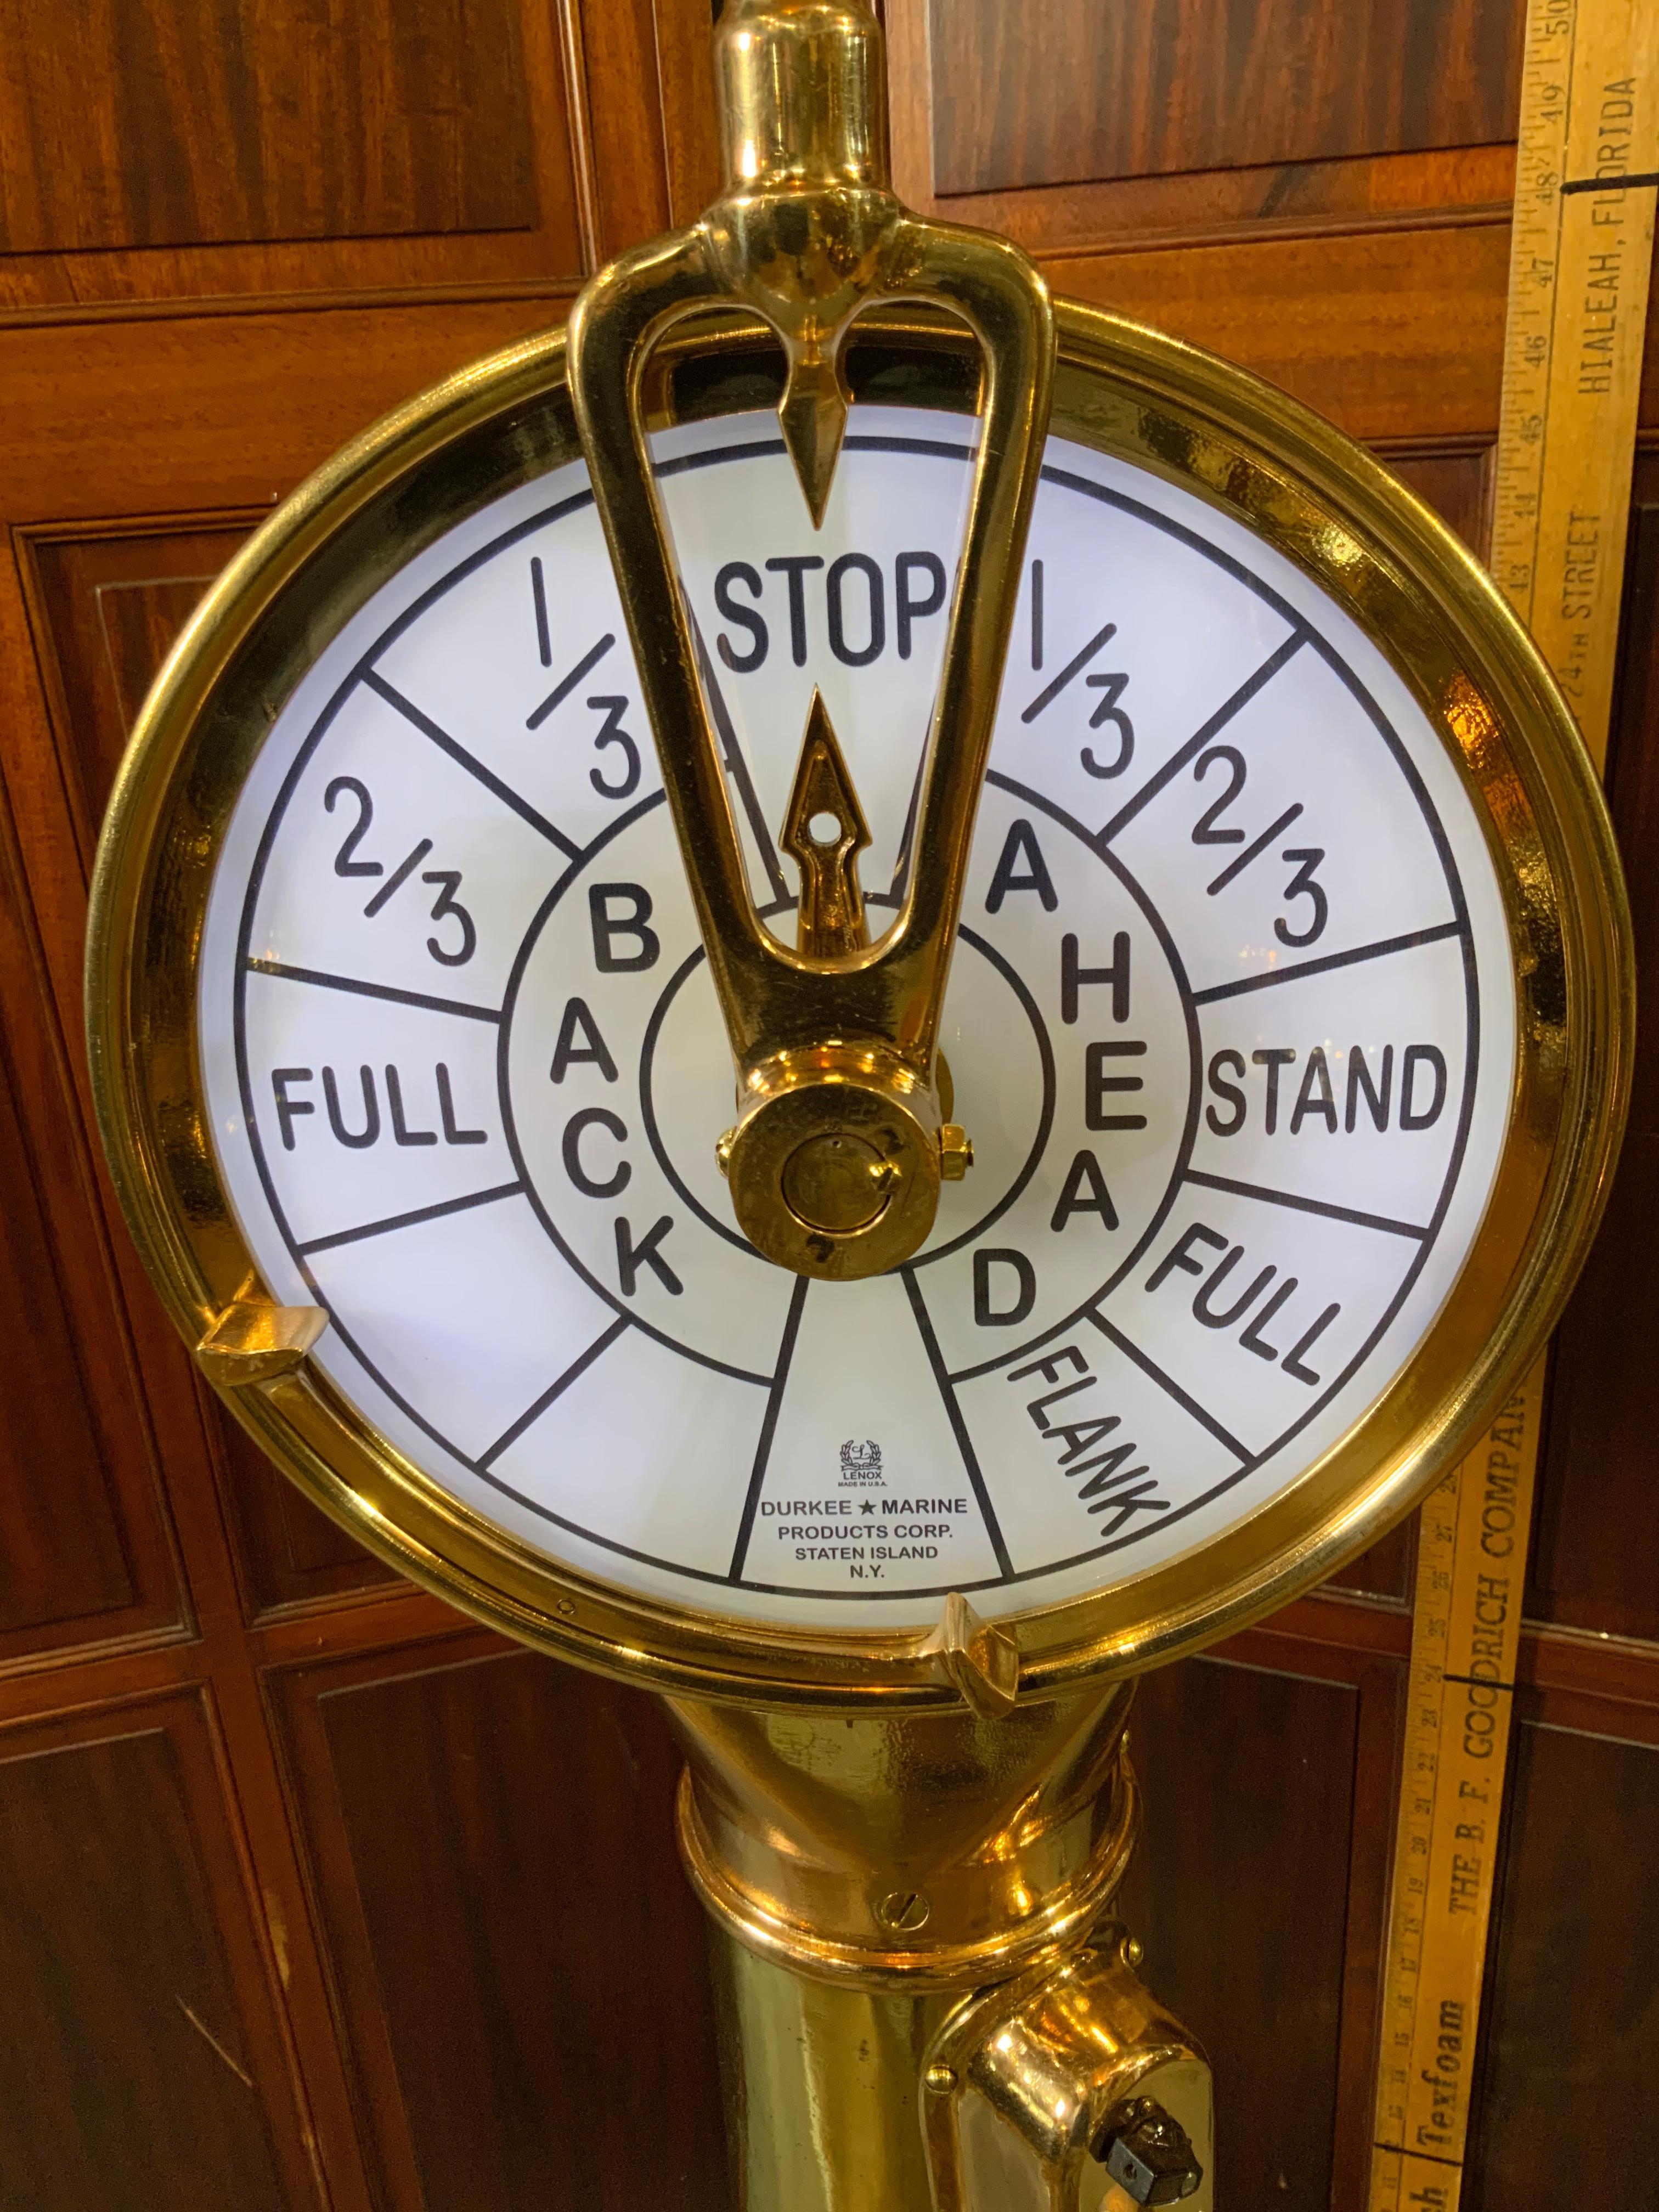 Here is a highly polished and fully restored ships engine order telegraph. It has been meticulously polished and lacquered to a very high gleam. The bells ring, it has been illuminated and also mounted to a thick mahogany base. Weight is 83 pounds.